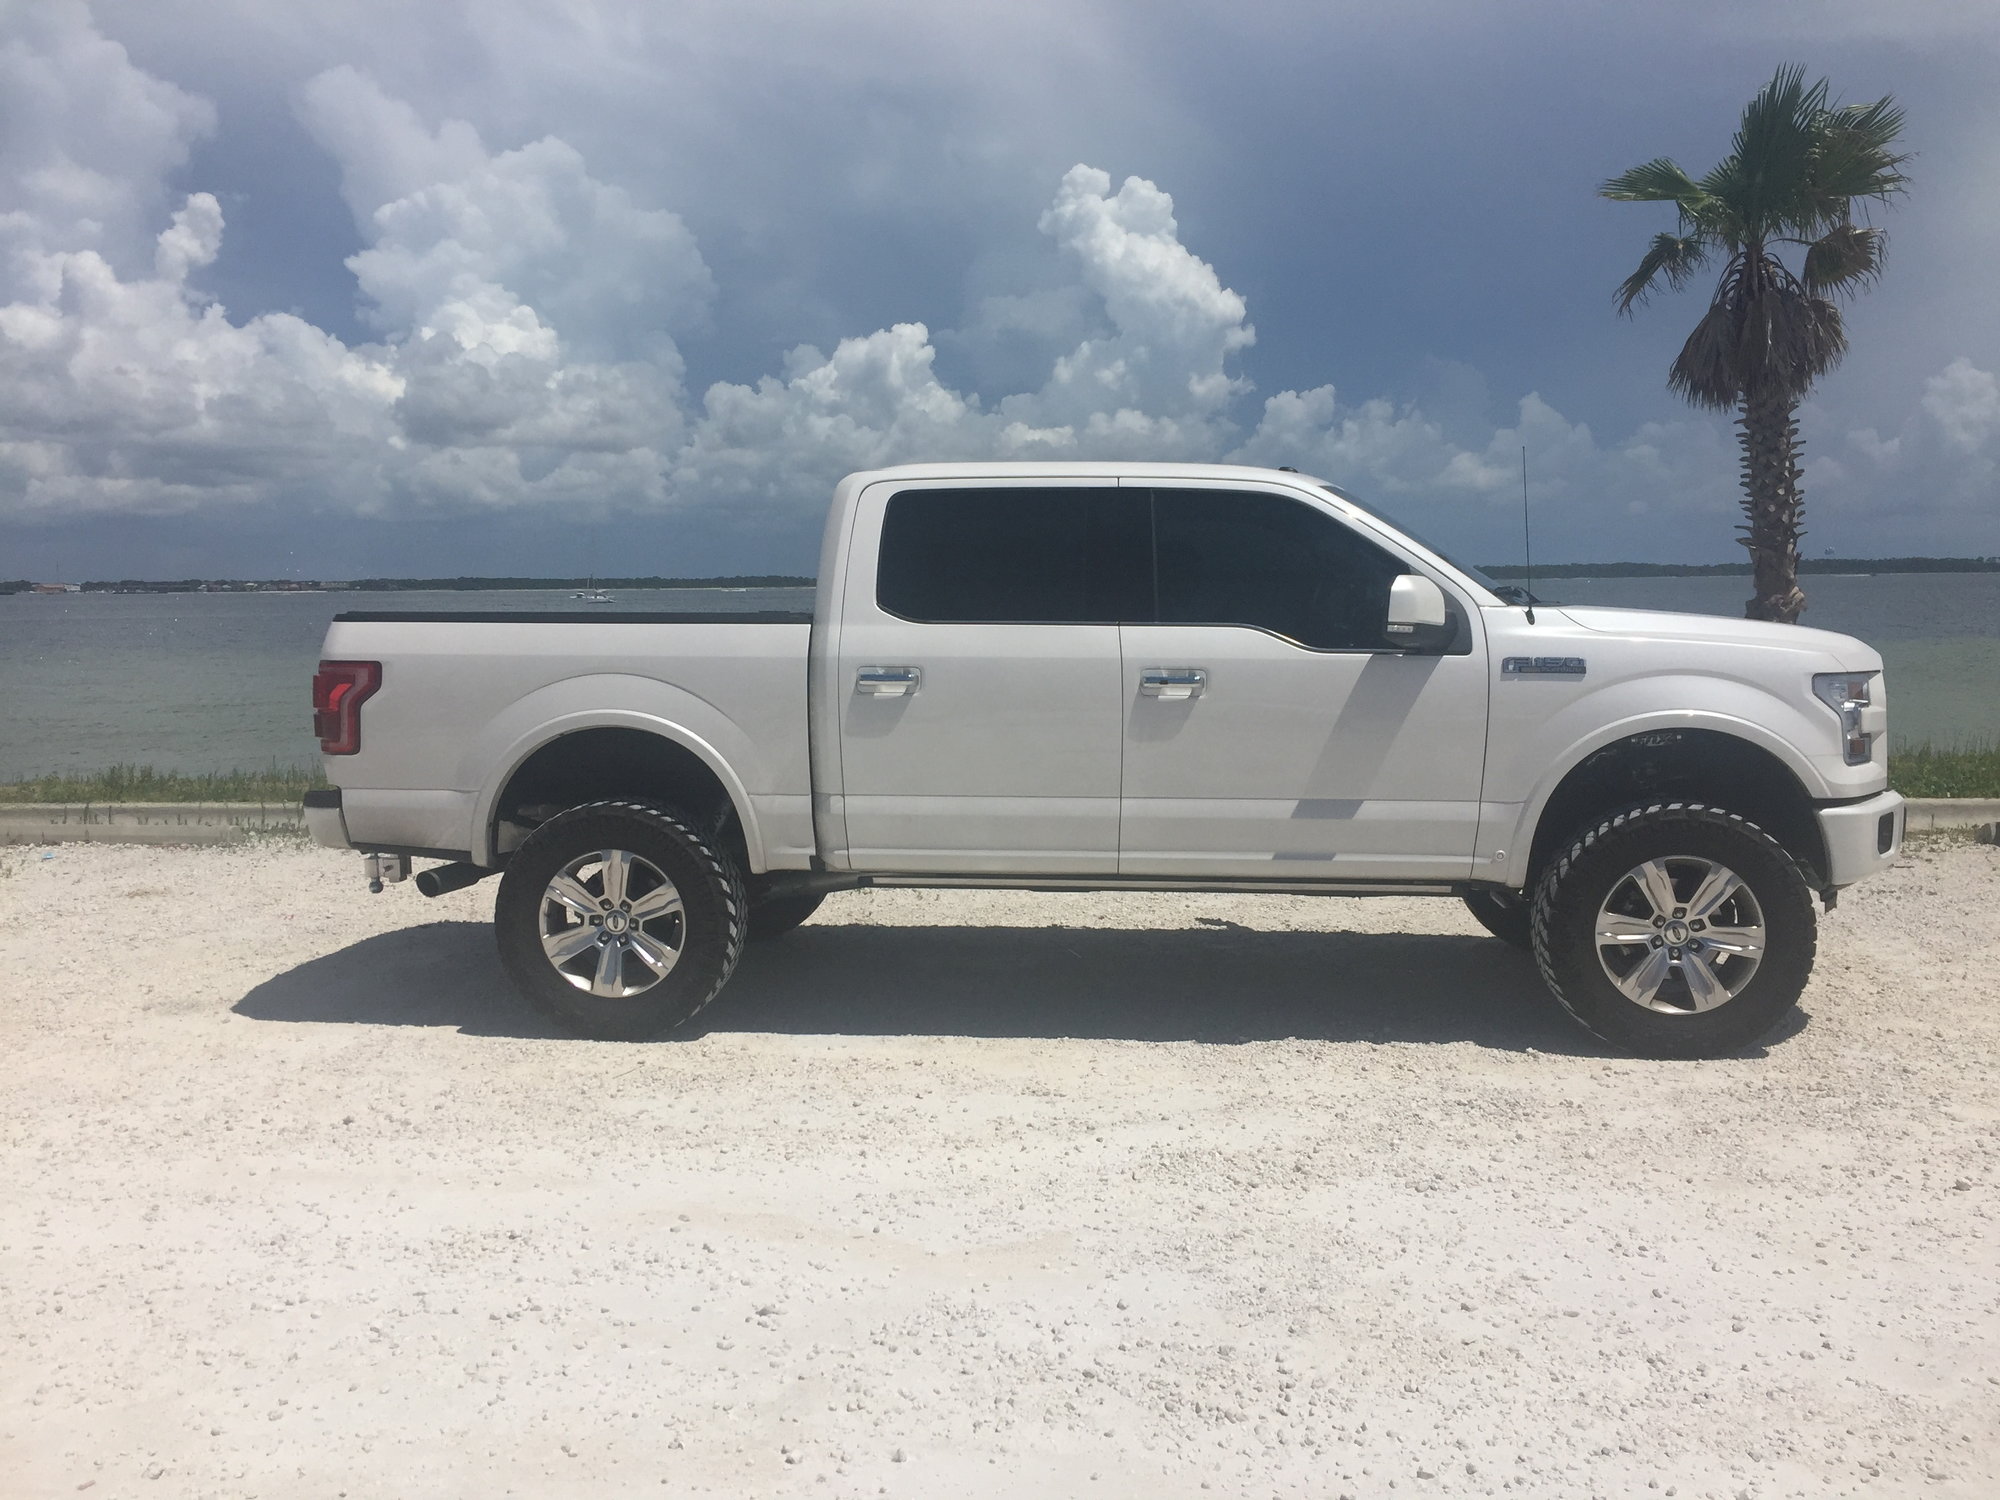 4" Lift with What Tire & Wheel Size - Page 2 - Ford F150 Forum - Community of Ford Truck Fans Best Tire Size For 4 Inch Lift F150